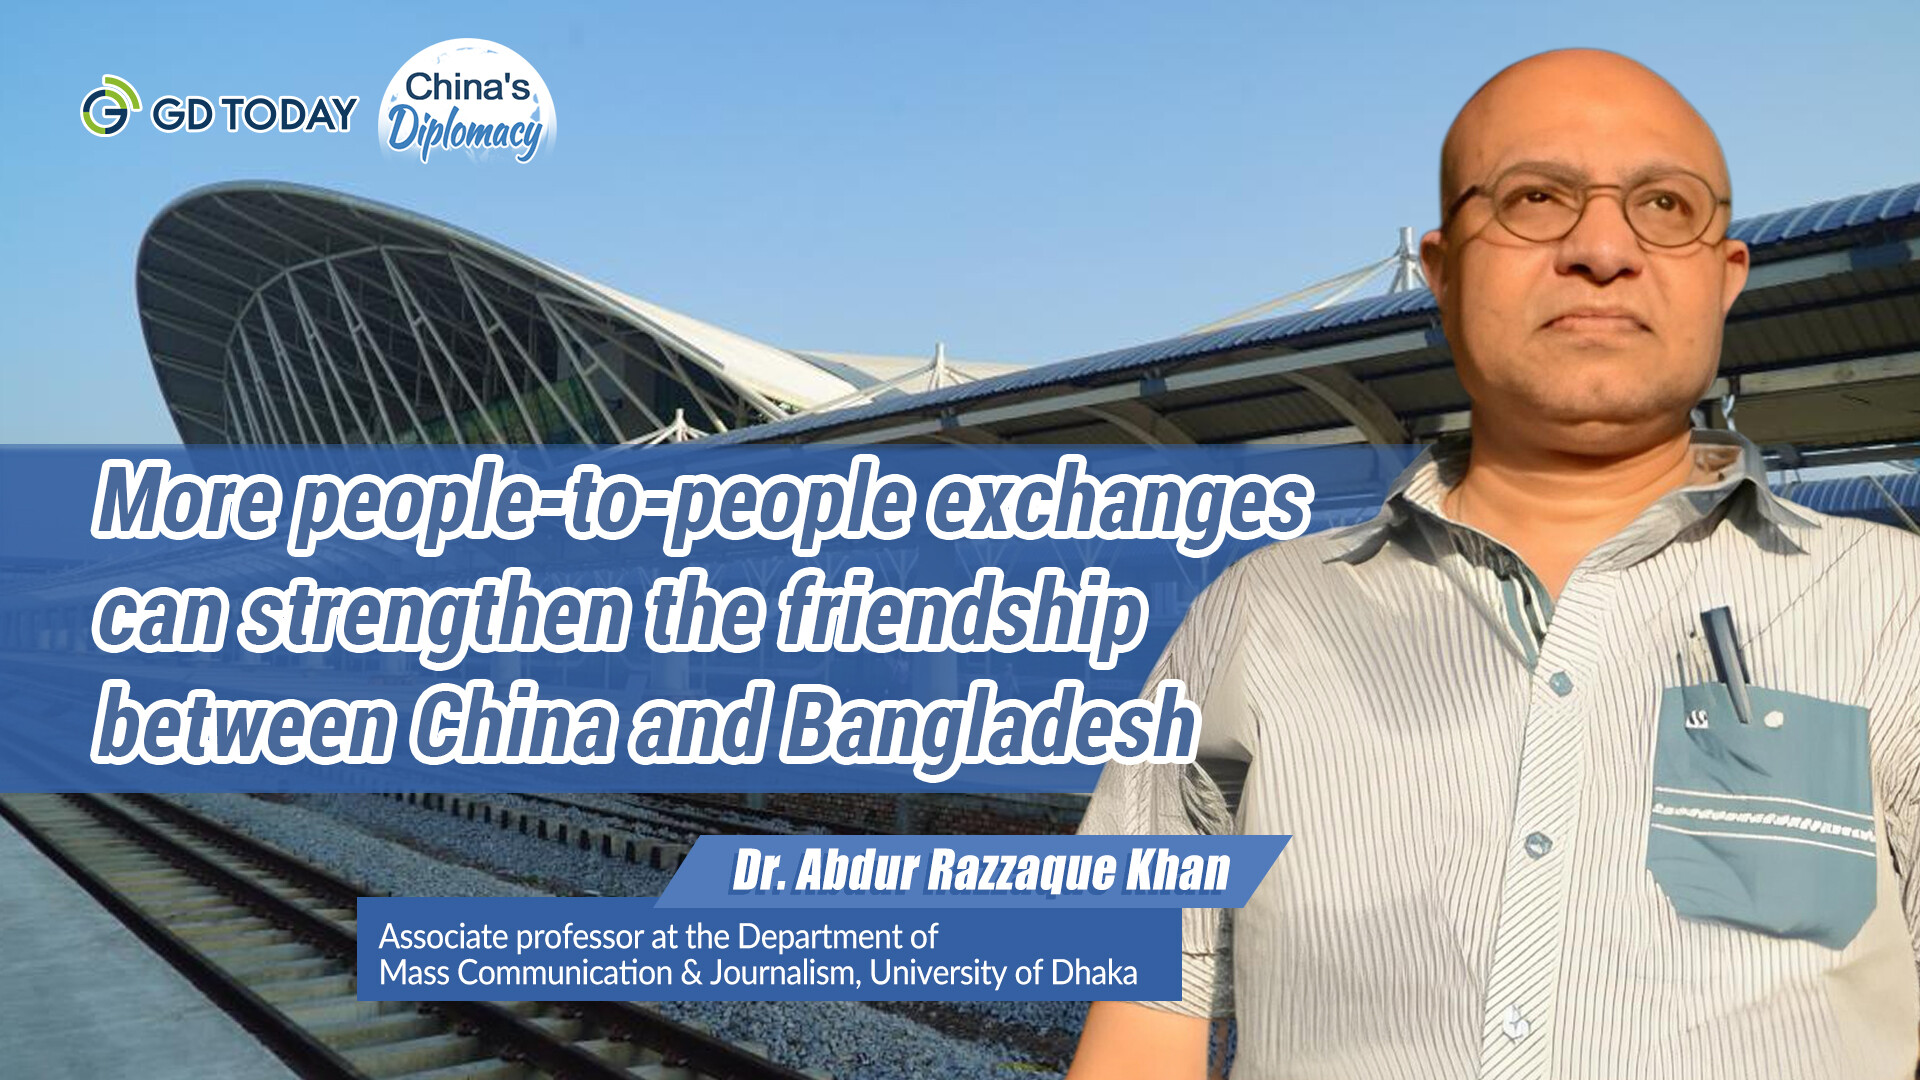 More people-to-people exchanges can strengthen friendship between China and Bangladesh: Bangladeshi expert